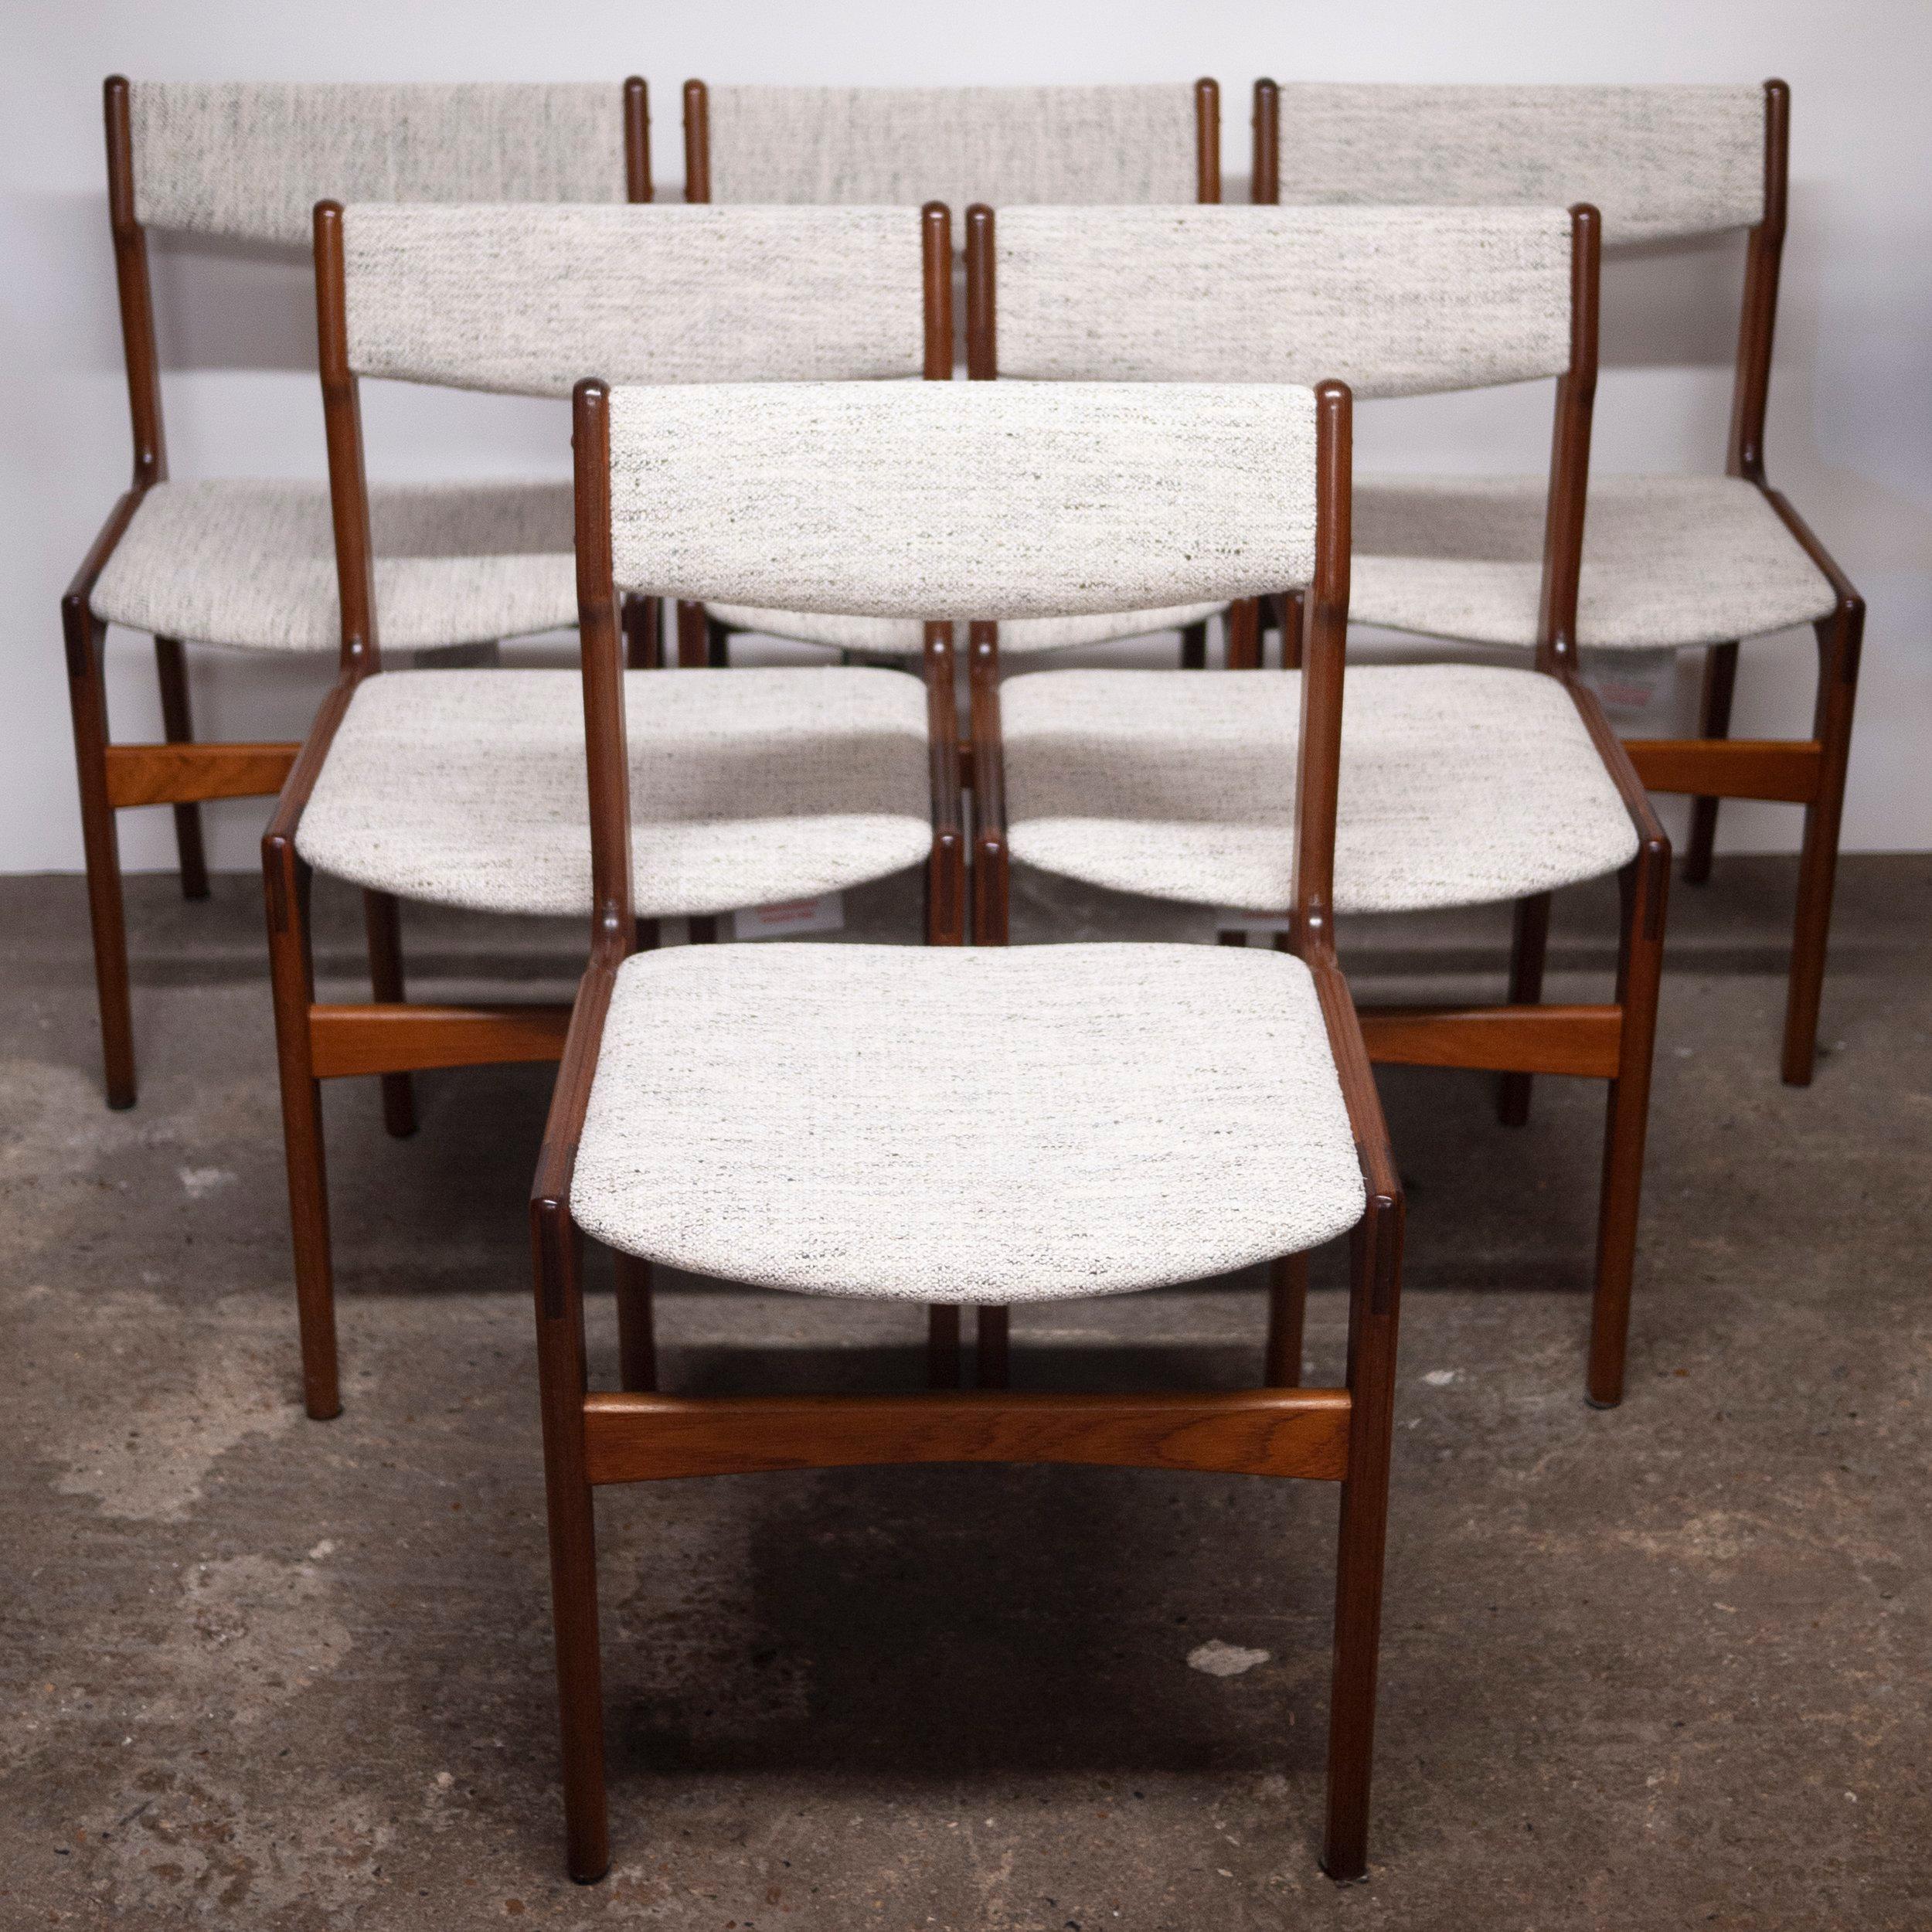 Mid-20th Century Vintage Danish Upholstered Teak Chairs by Anderstrup Stolefabrik, Set of 6 For Sale